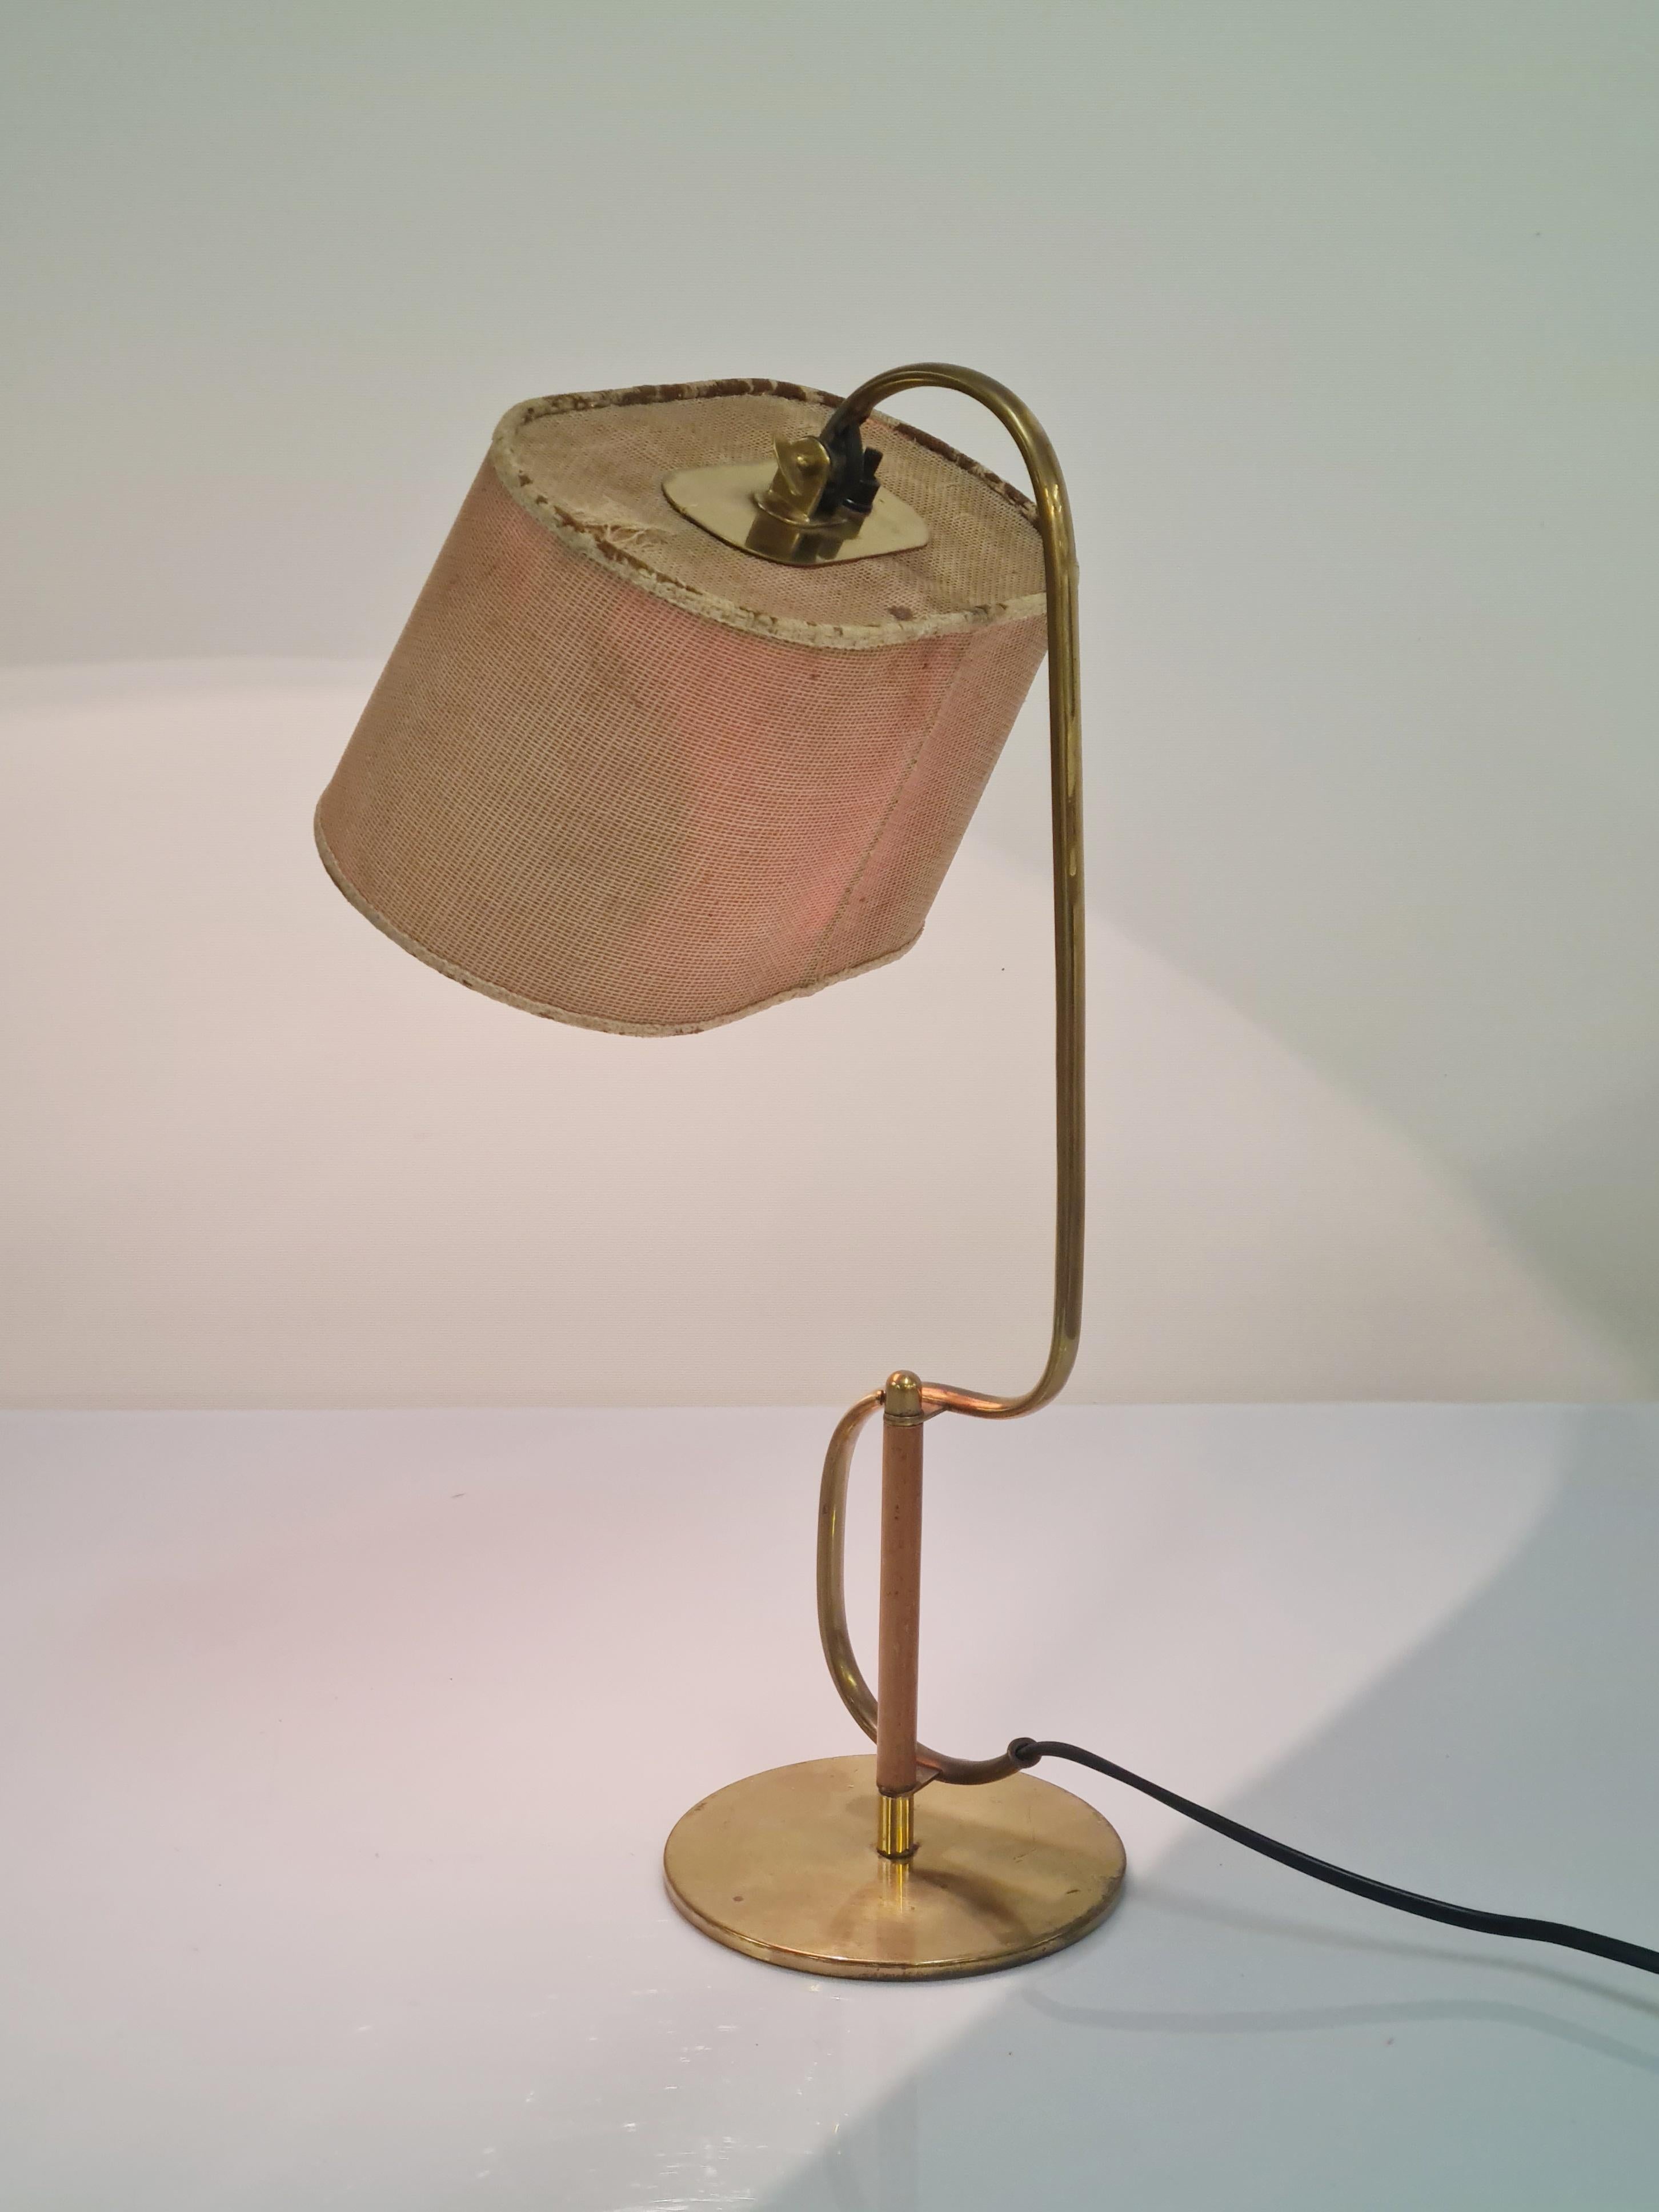 An unbelievably beautiful table lamp by the master of lightings design Paavo Tynell. This lamp is not only sleek, and very different than the other standard Tynell table lamps, it is also very rare. This is the second example we have been able to